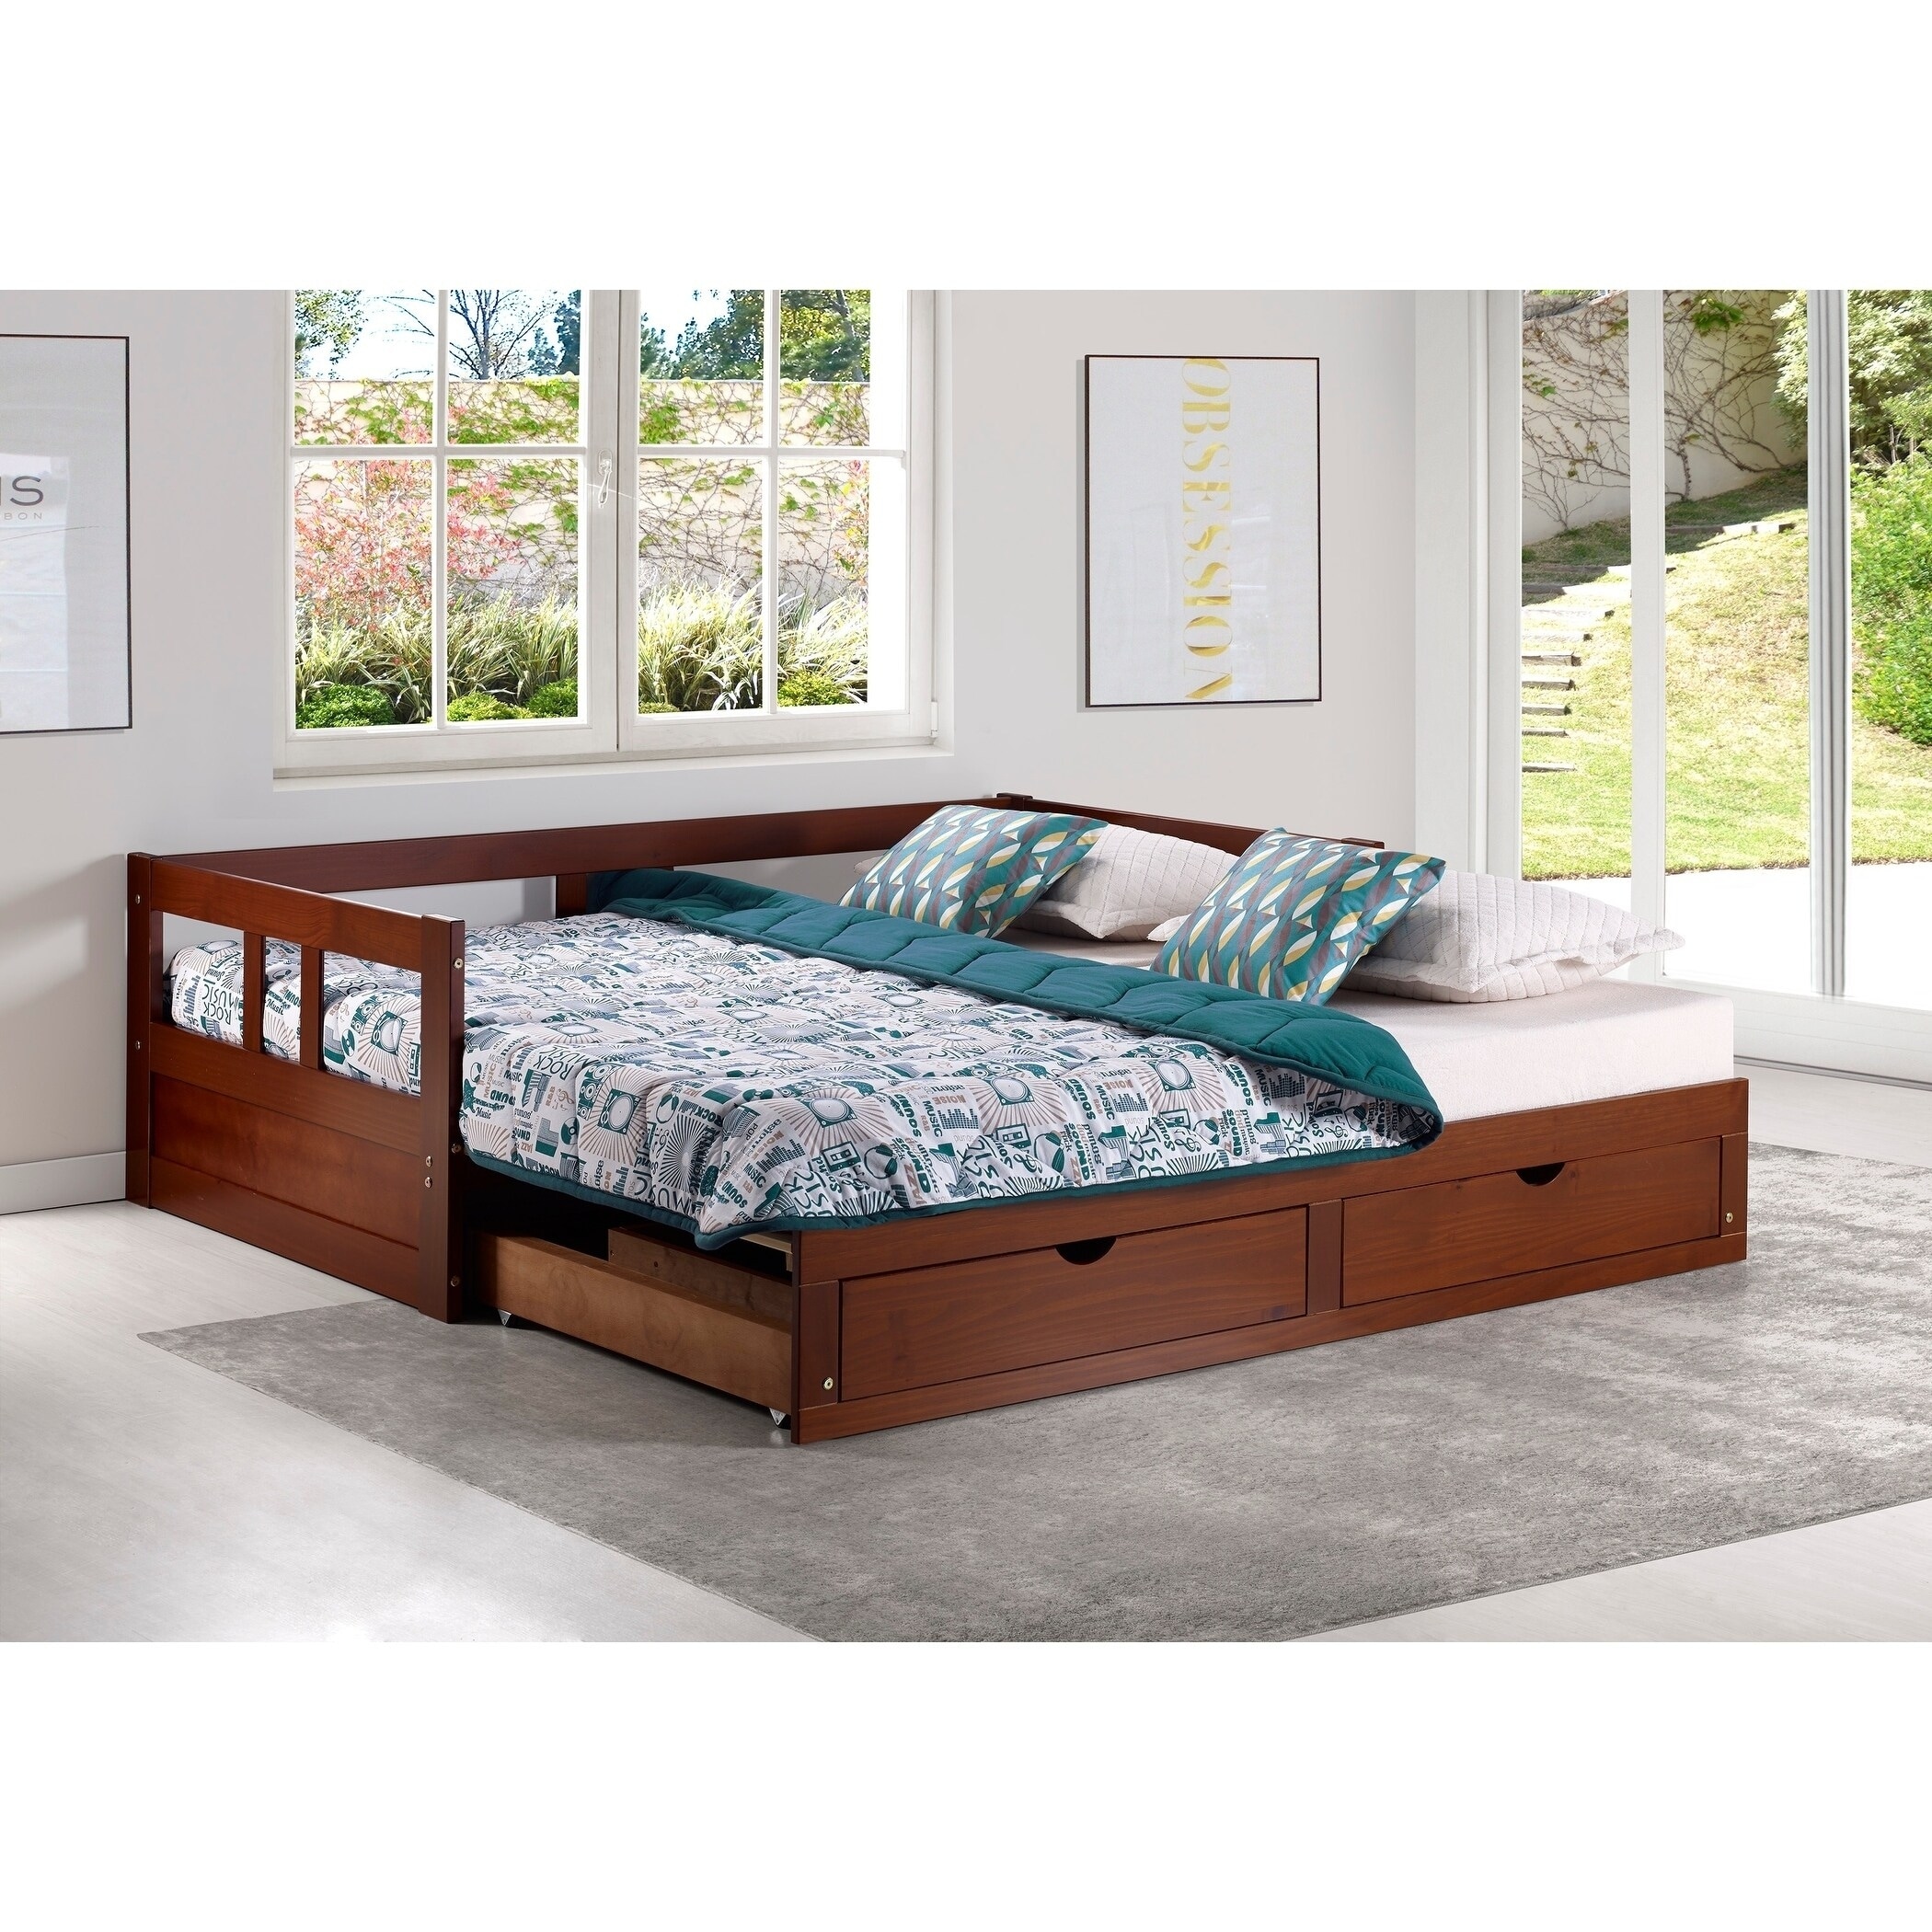 https://ak1.ostkcdn.com/images/products/is/images/direct/865731626939fb77bd709097737e4330f37c2601/Melody-Expandable-Twin-to-King-Trundle-Daybed-with-Storage-Drawers.jpg